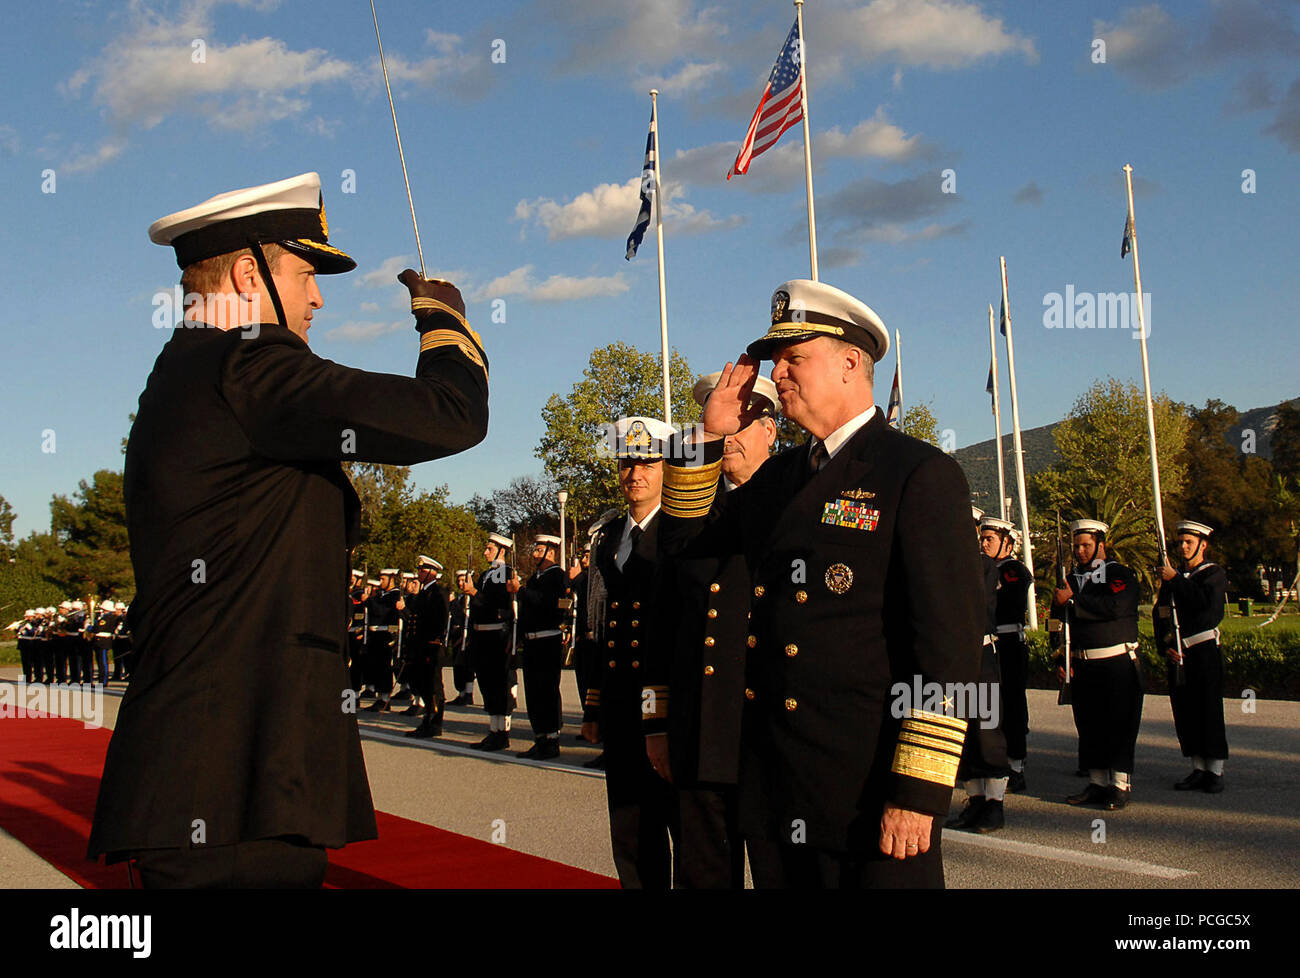 (Nov. 12, 2009) During a welcoming ceremony at the Hellenic Navy General Staff (HNGS) headquarters, Chief of Naval Operations (CNO) Adm. Gary Rouhgead, right, salutes the officer in charge at the completion of inspecting the troops with Chief of the HNGS, Vice Adm. Georgios Karamalikisas, as part of the official counterpart visit to the Hellenic Navy. Stock Photo